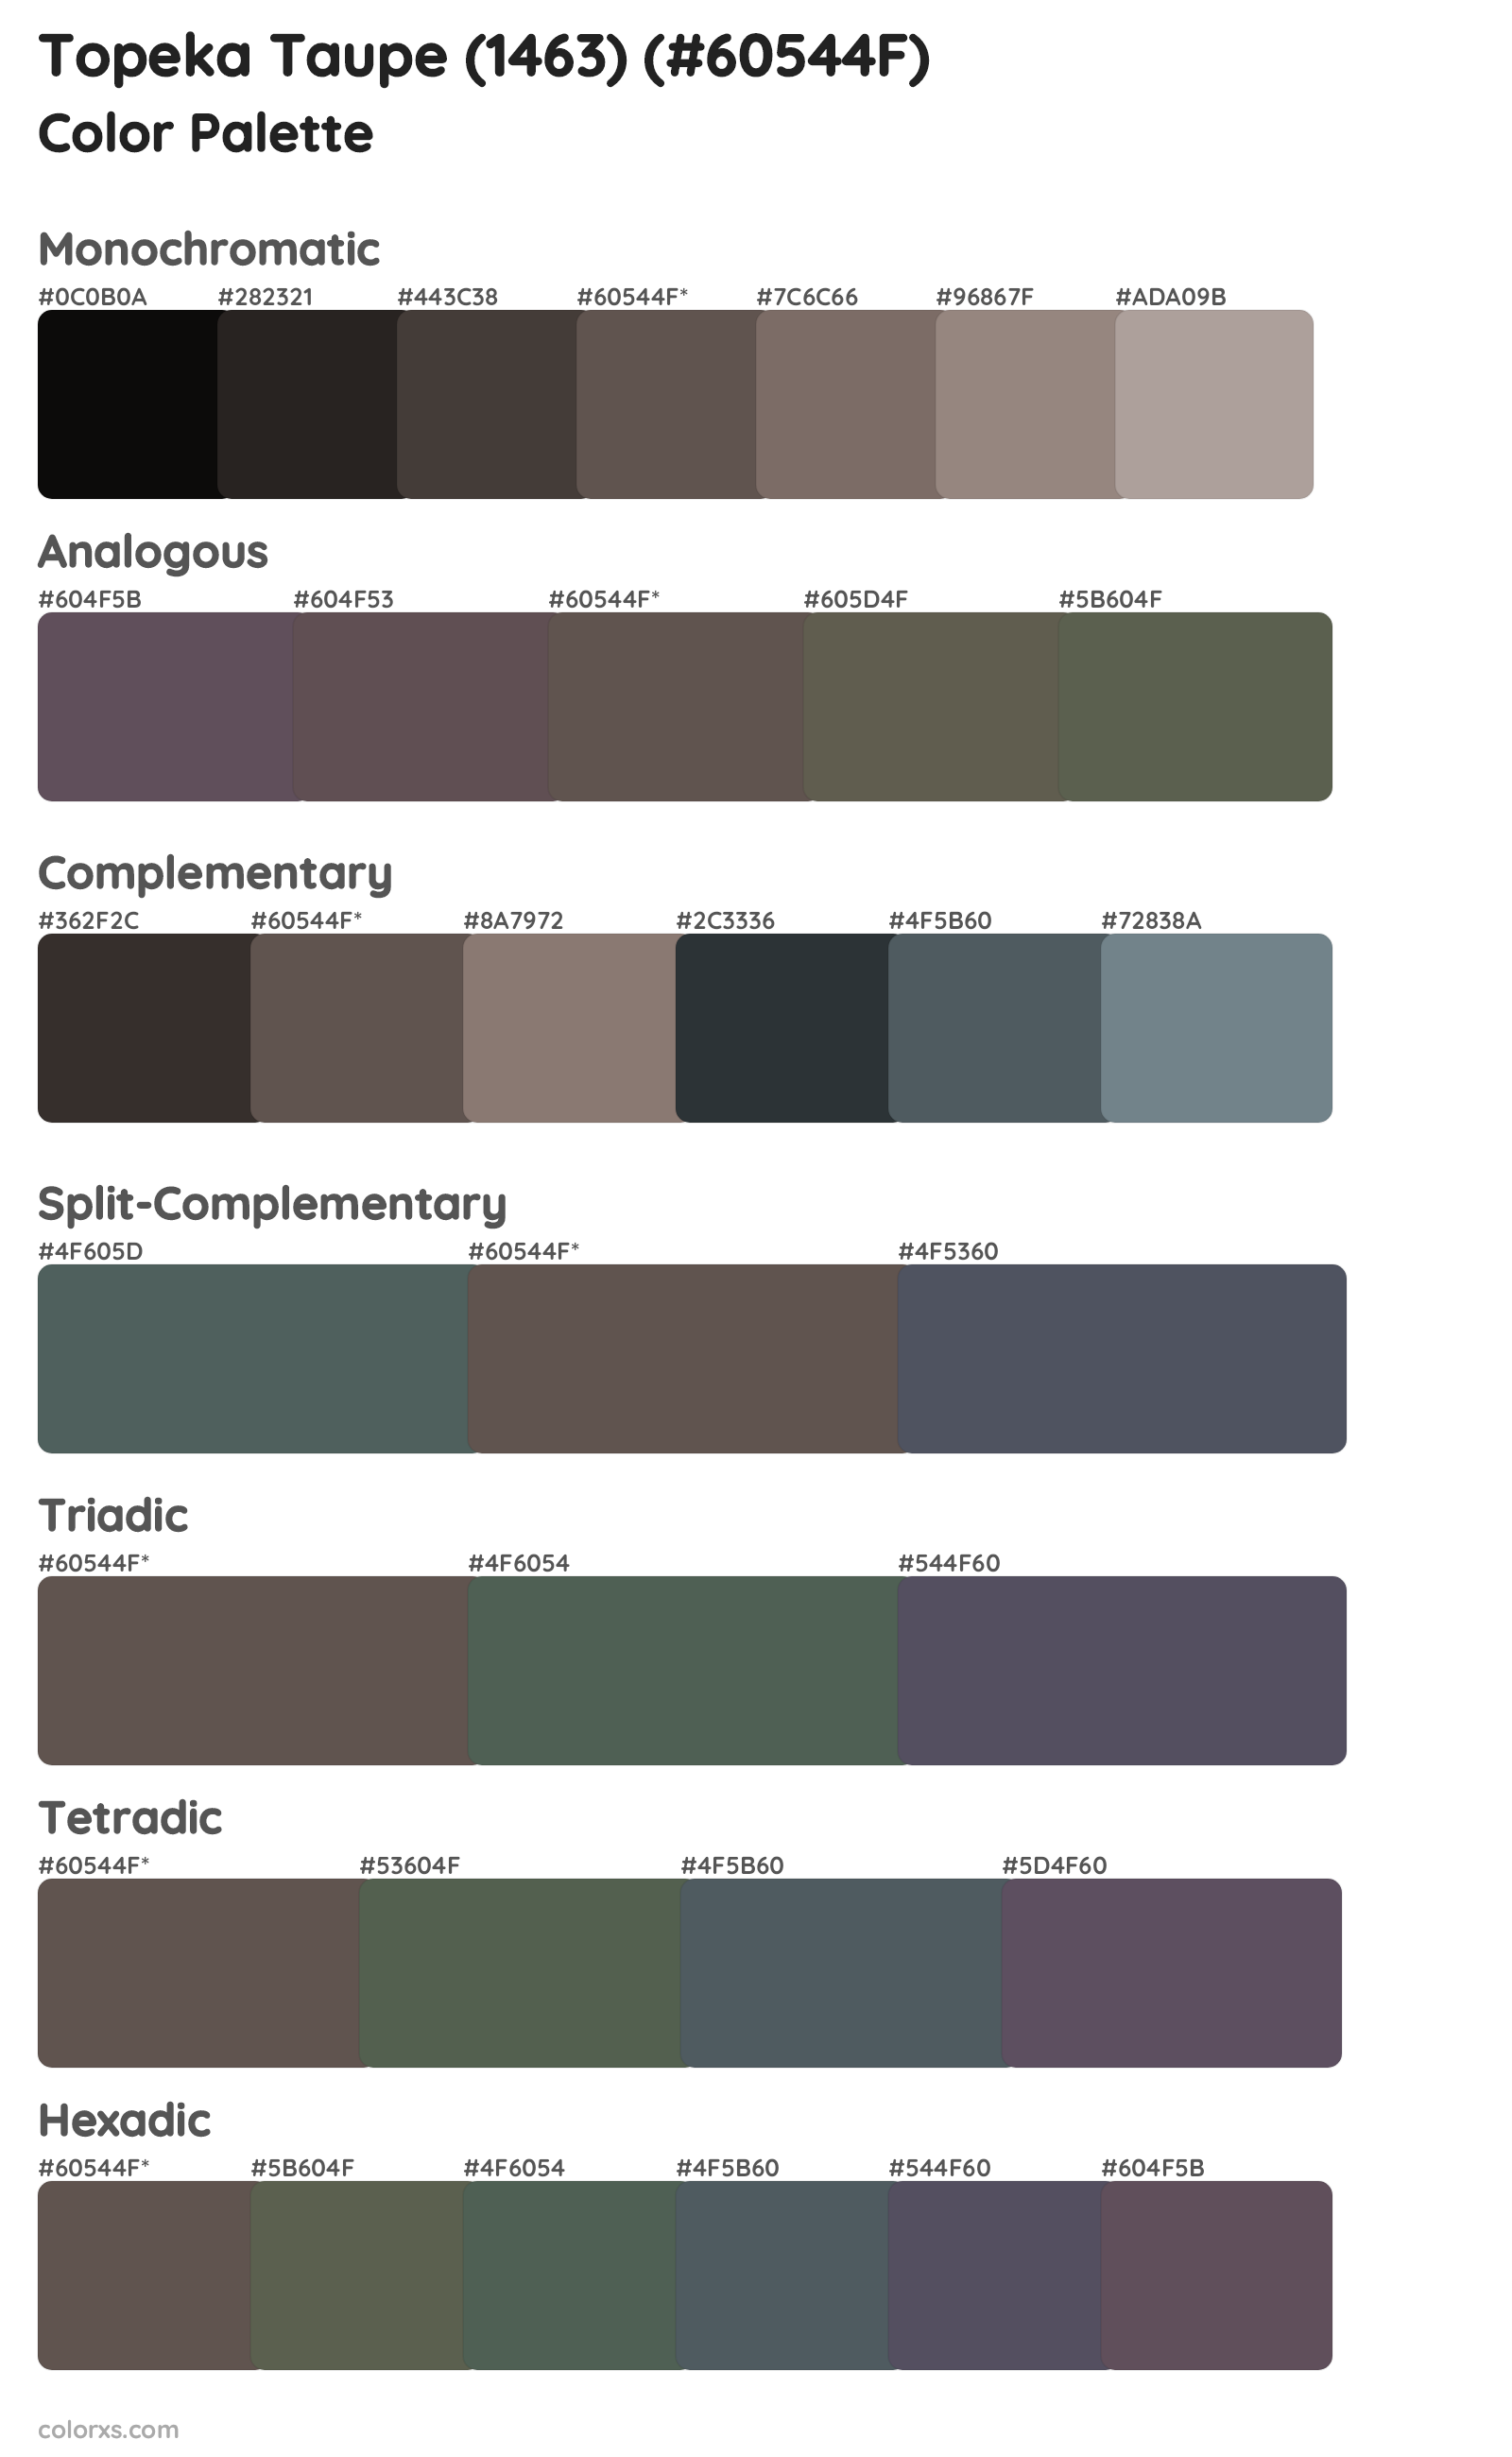 Topeka Taupe (1463) Color Scheme Palettes